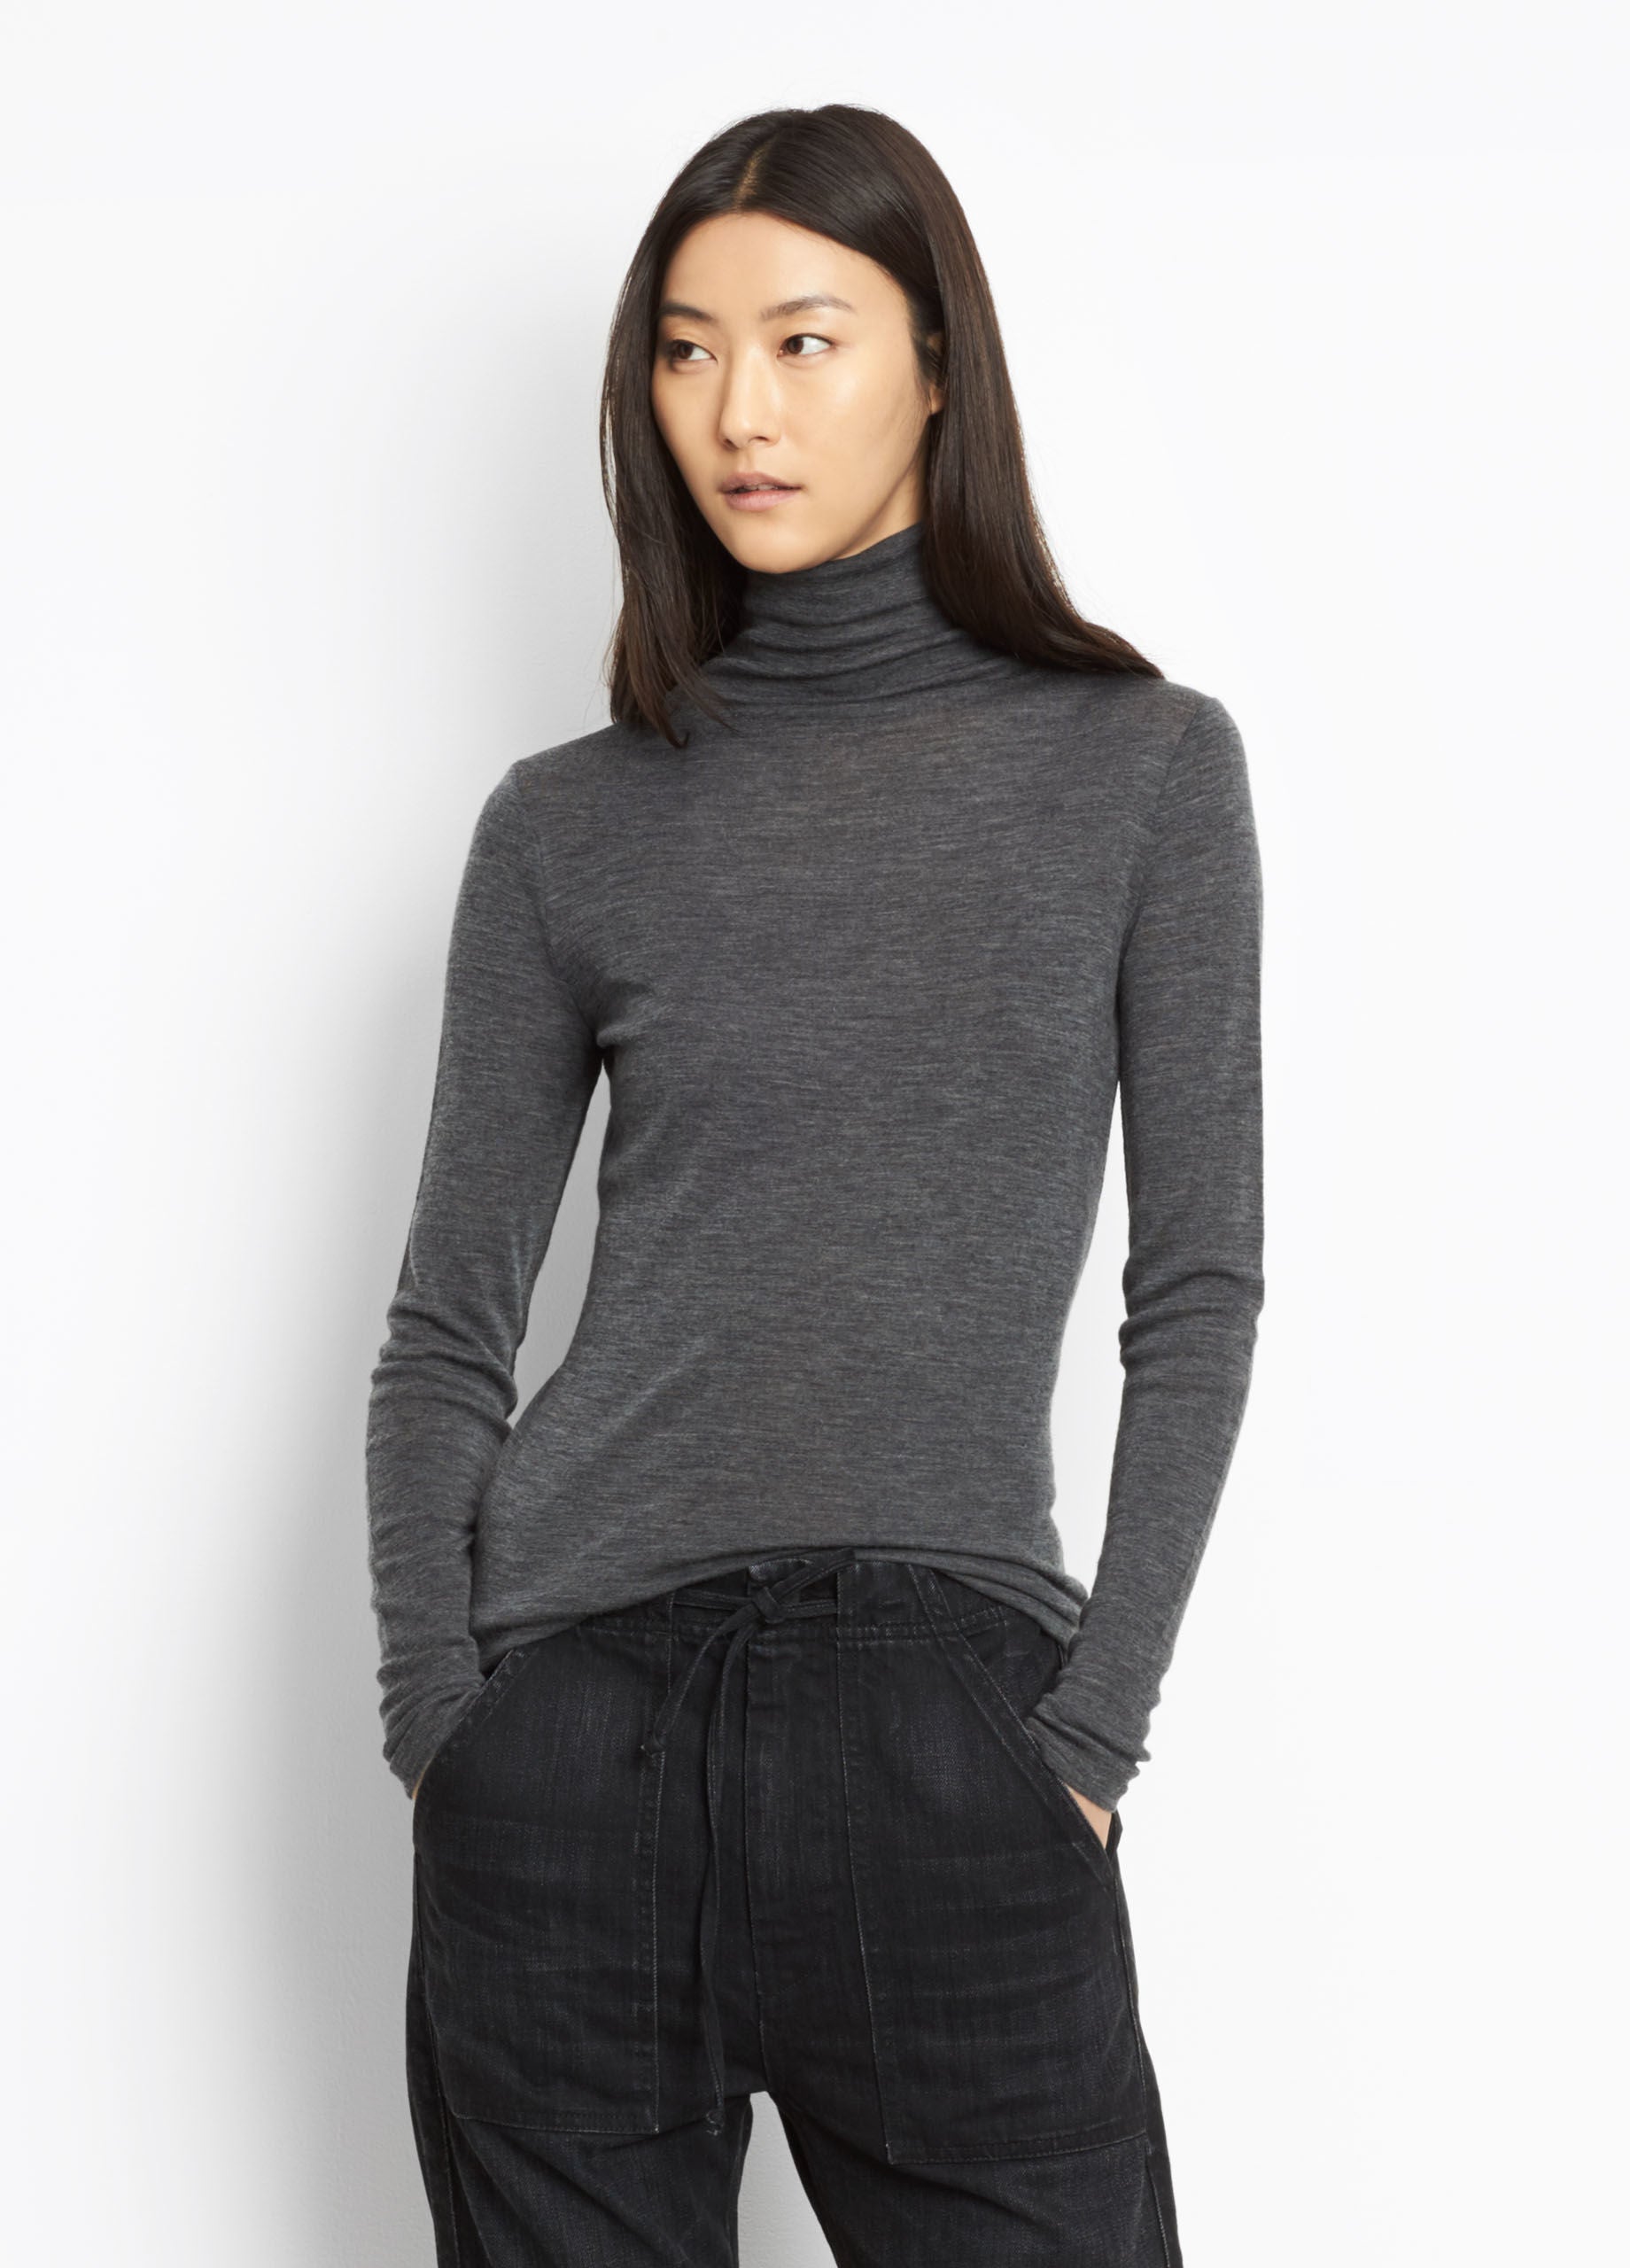 Vince heather gray wool turtleneck found at PATRICIA in Southern Pines, NC